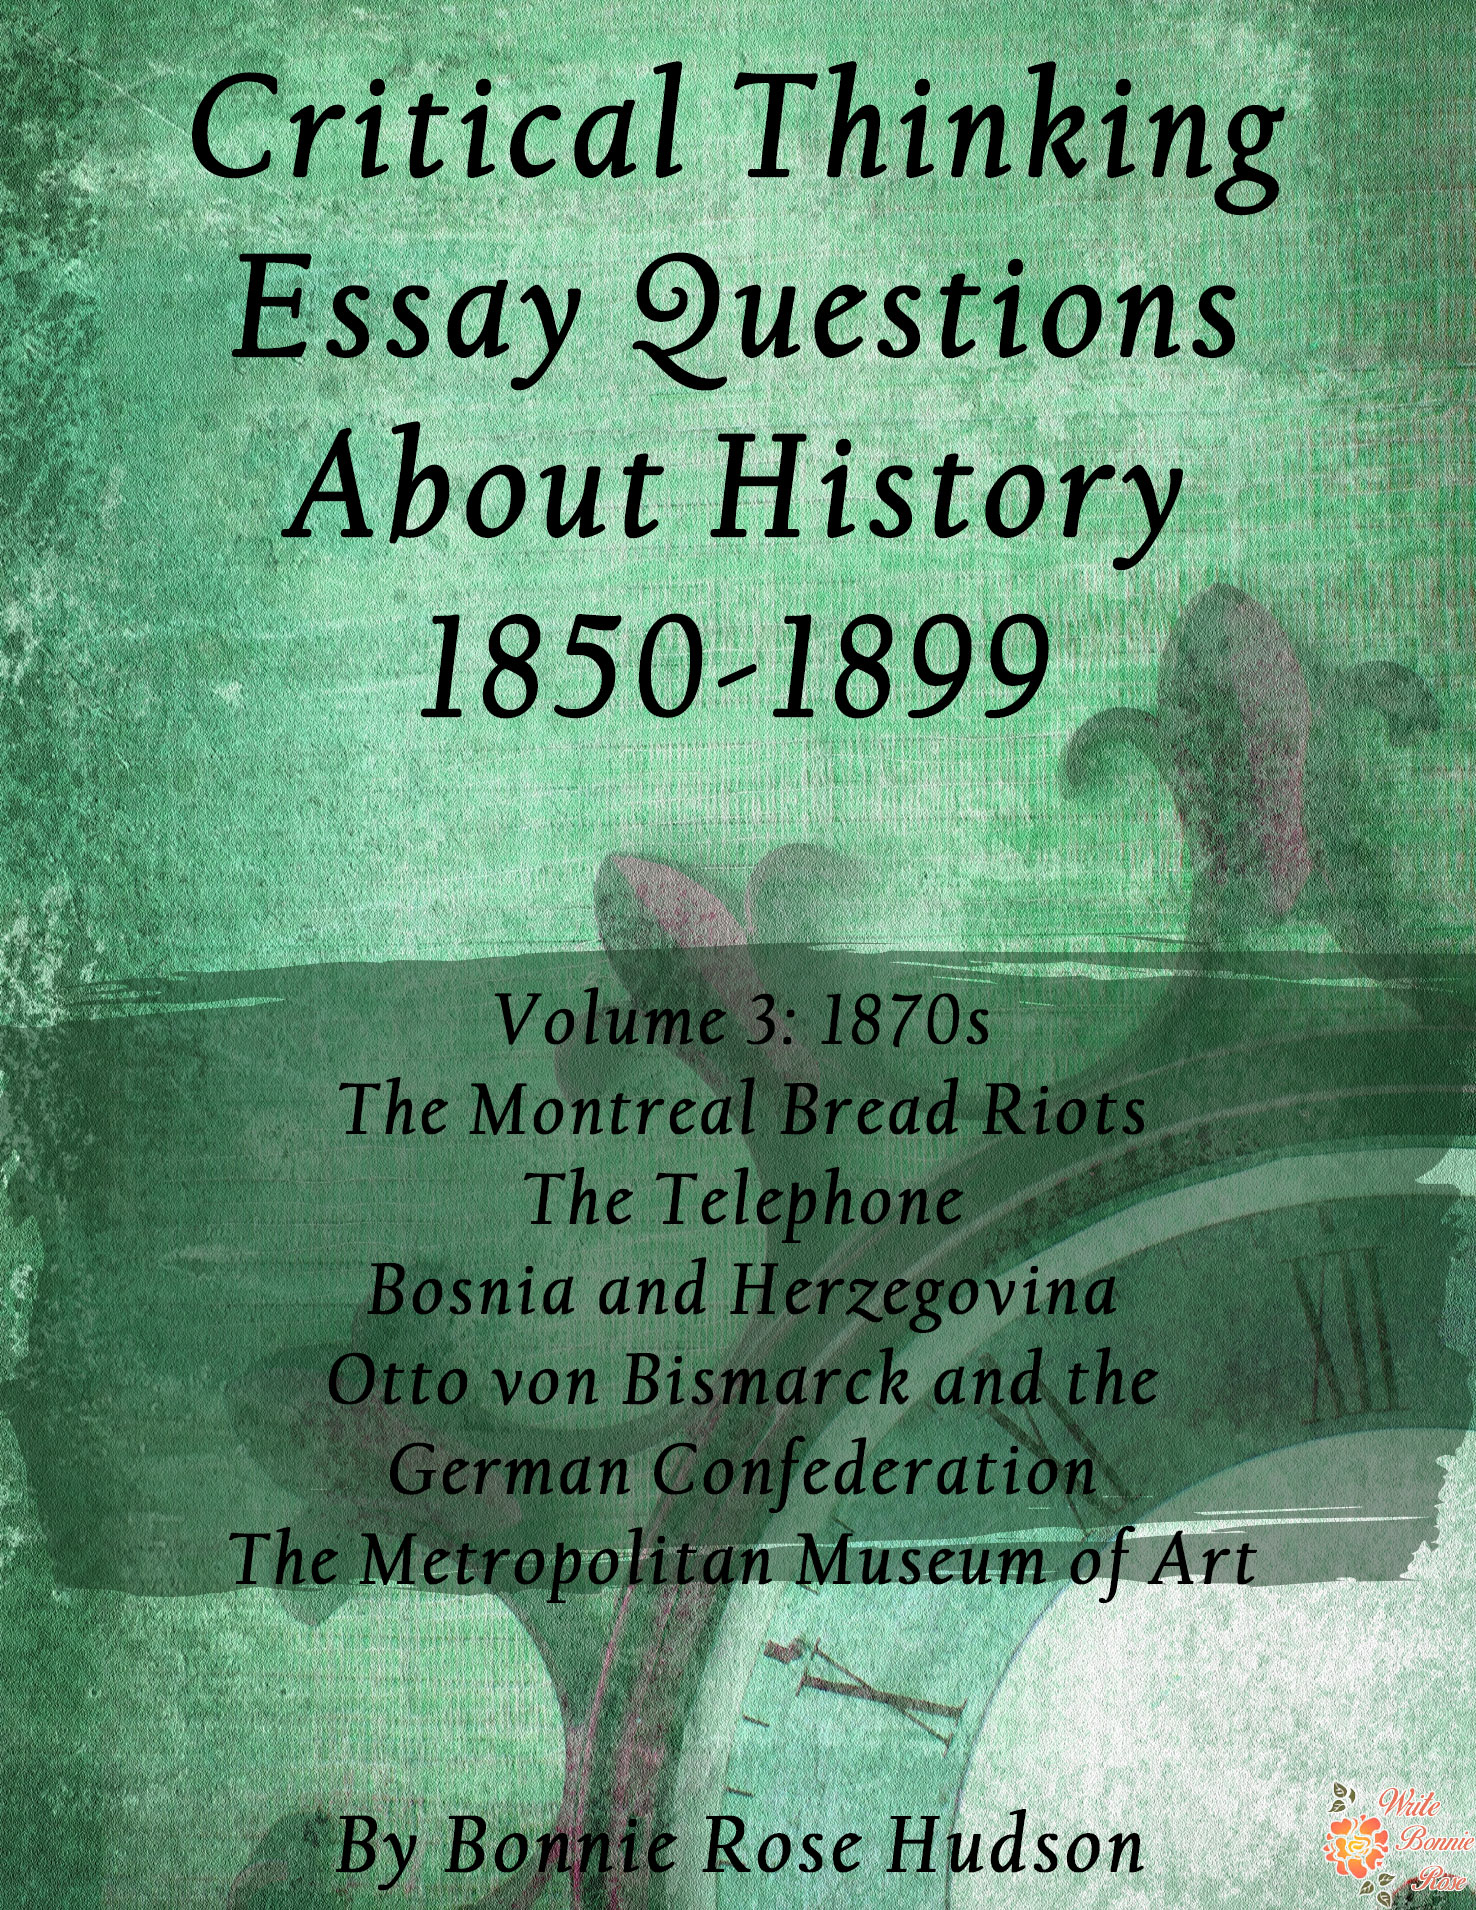 FREE Critical Thinking Essay Questions About History 1850-1899, Volume 3